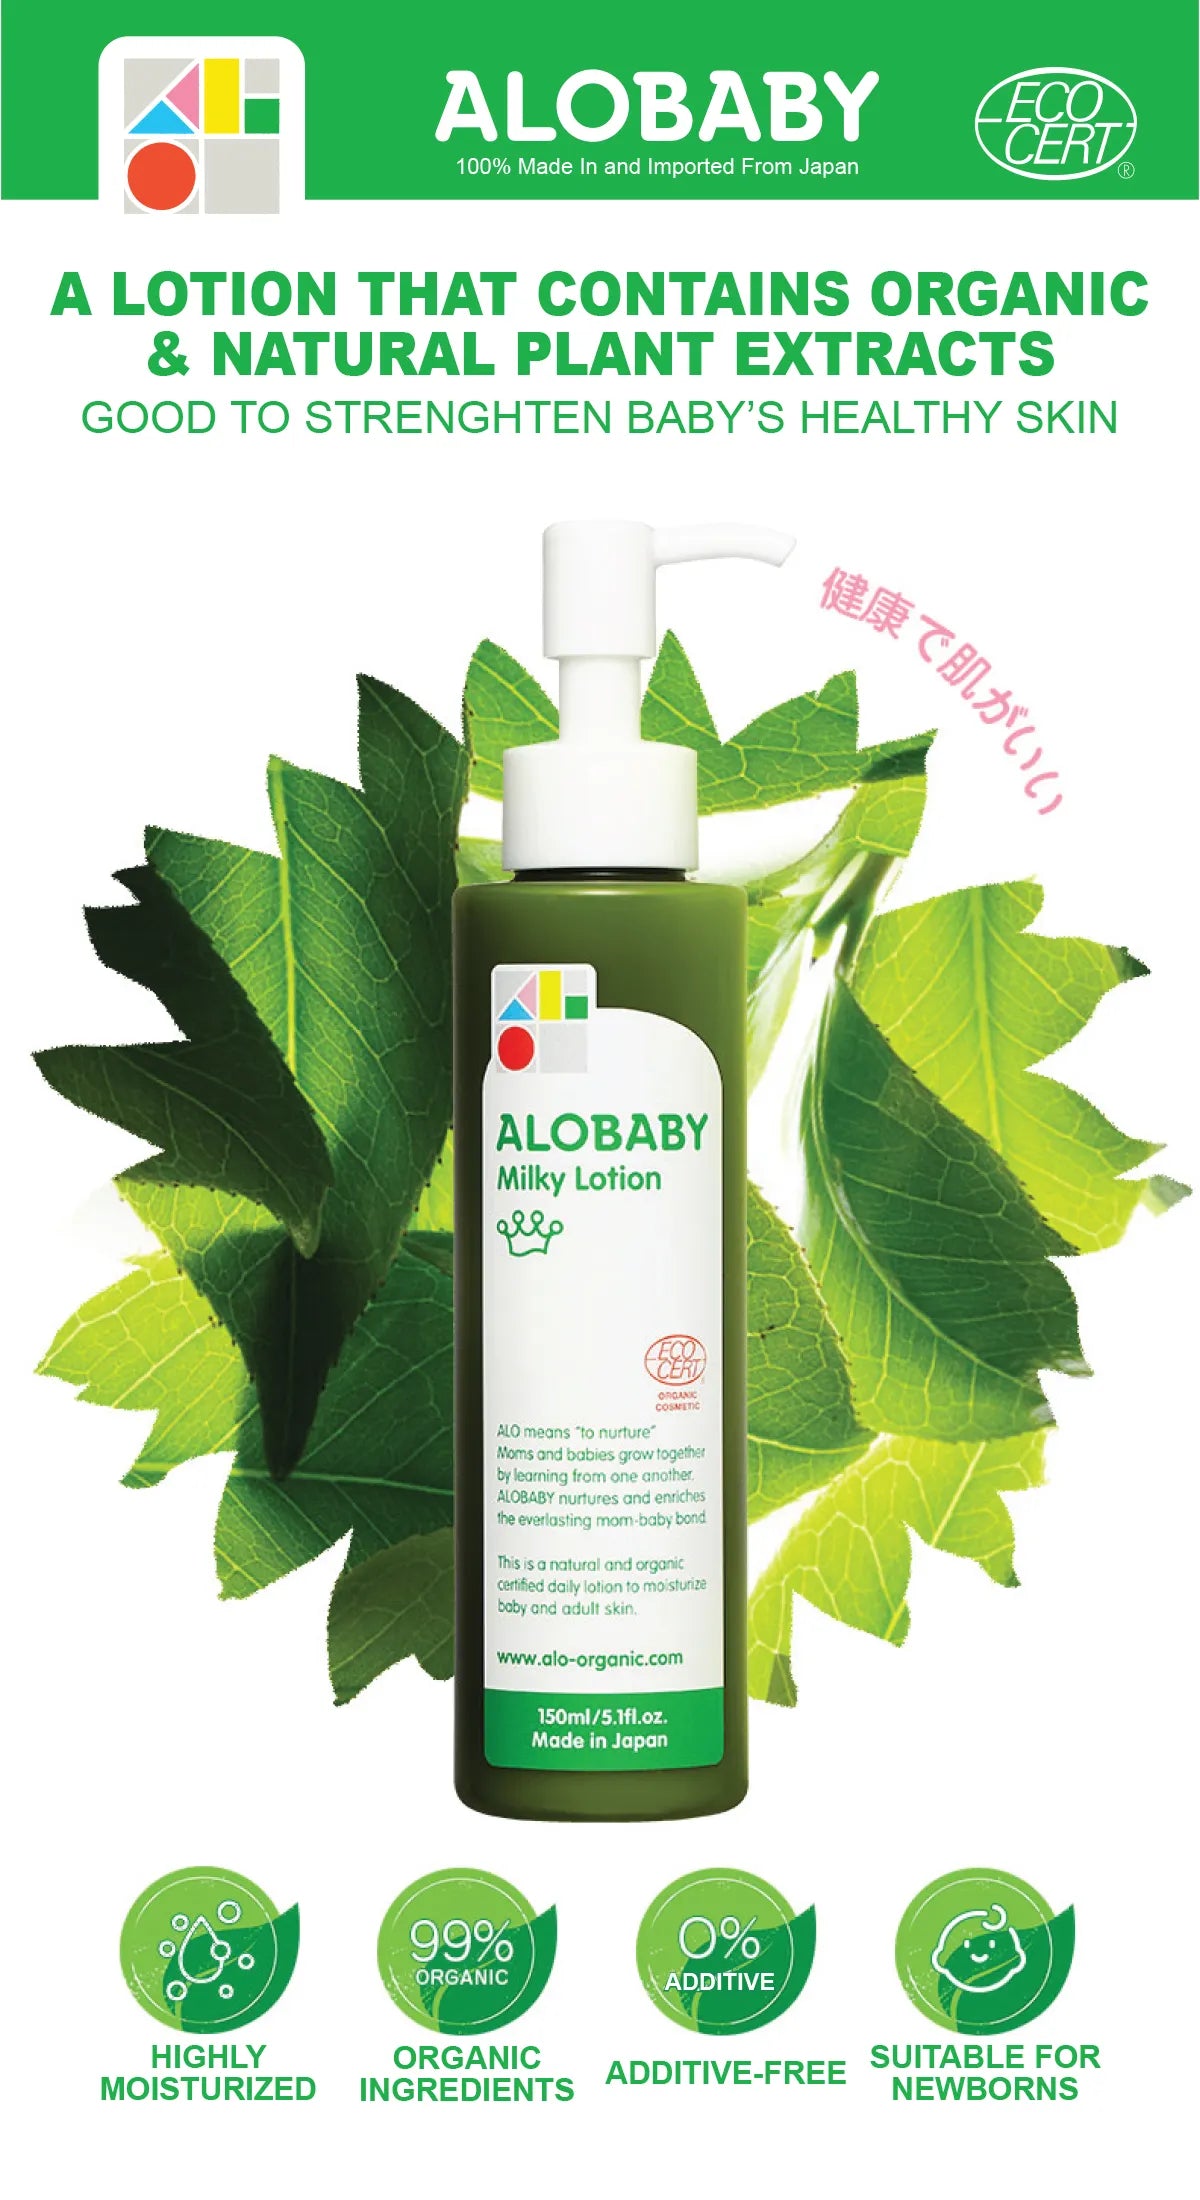 Made-in-Japan organic Milky Lotion is ALOBABY's signature item. It provides high moisturizing effect and is certified by the world-known ECOCERT. Contains natural moisturizing ingredients, such as Jojoba Oil and Shea Butter.